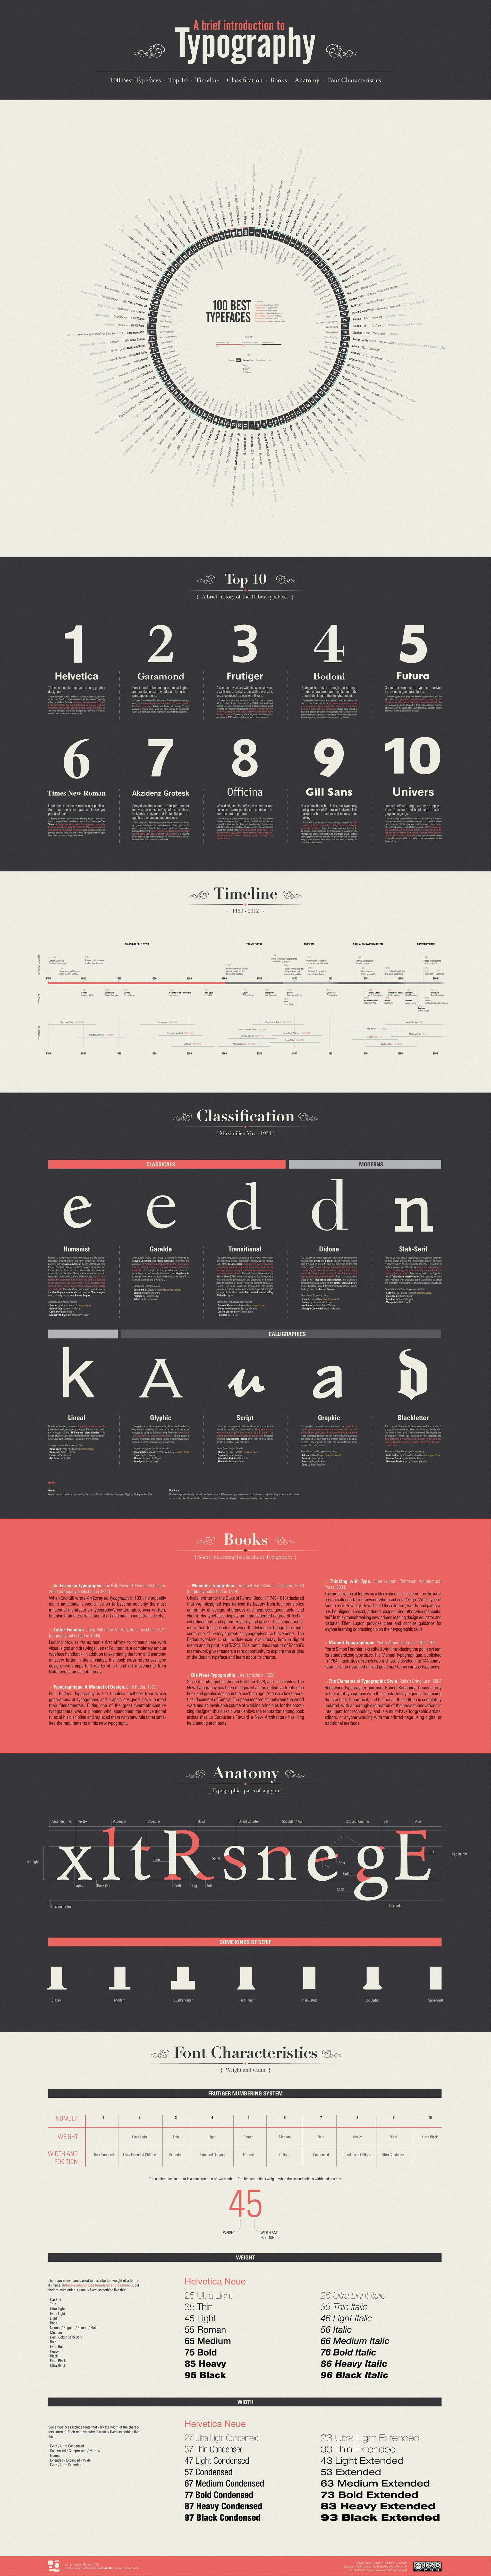 A Brief Introduction To Typography Infographic